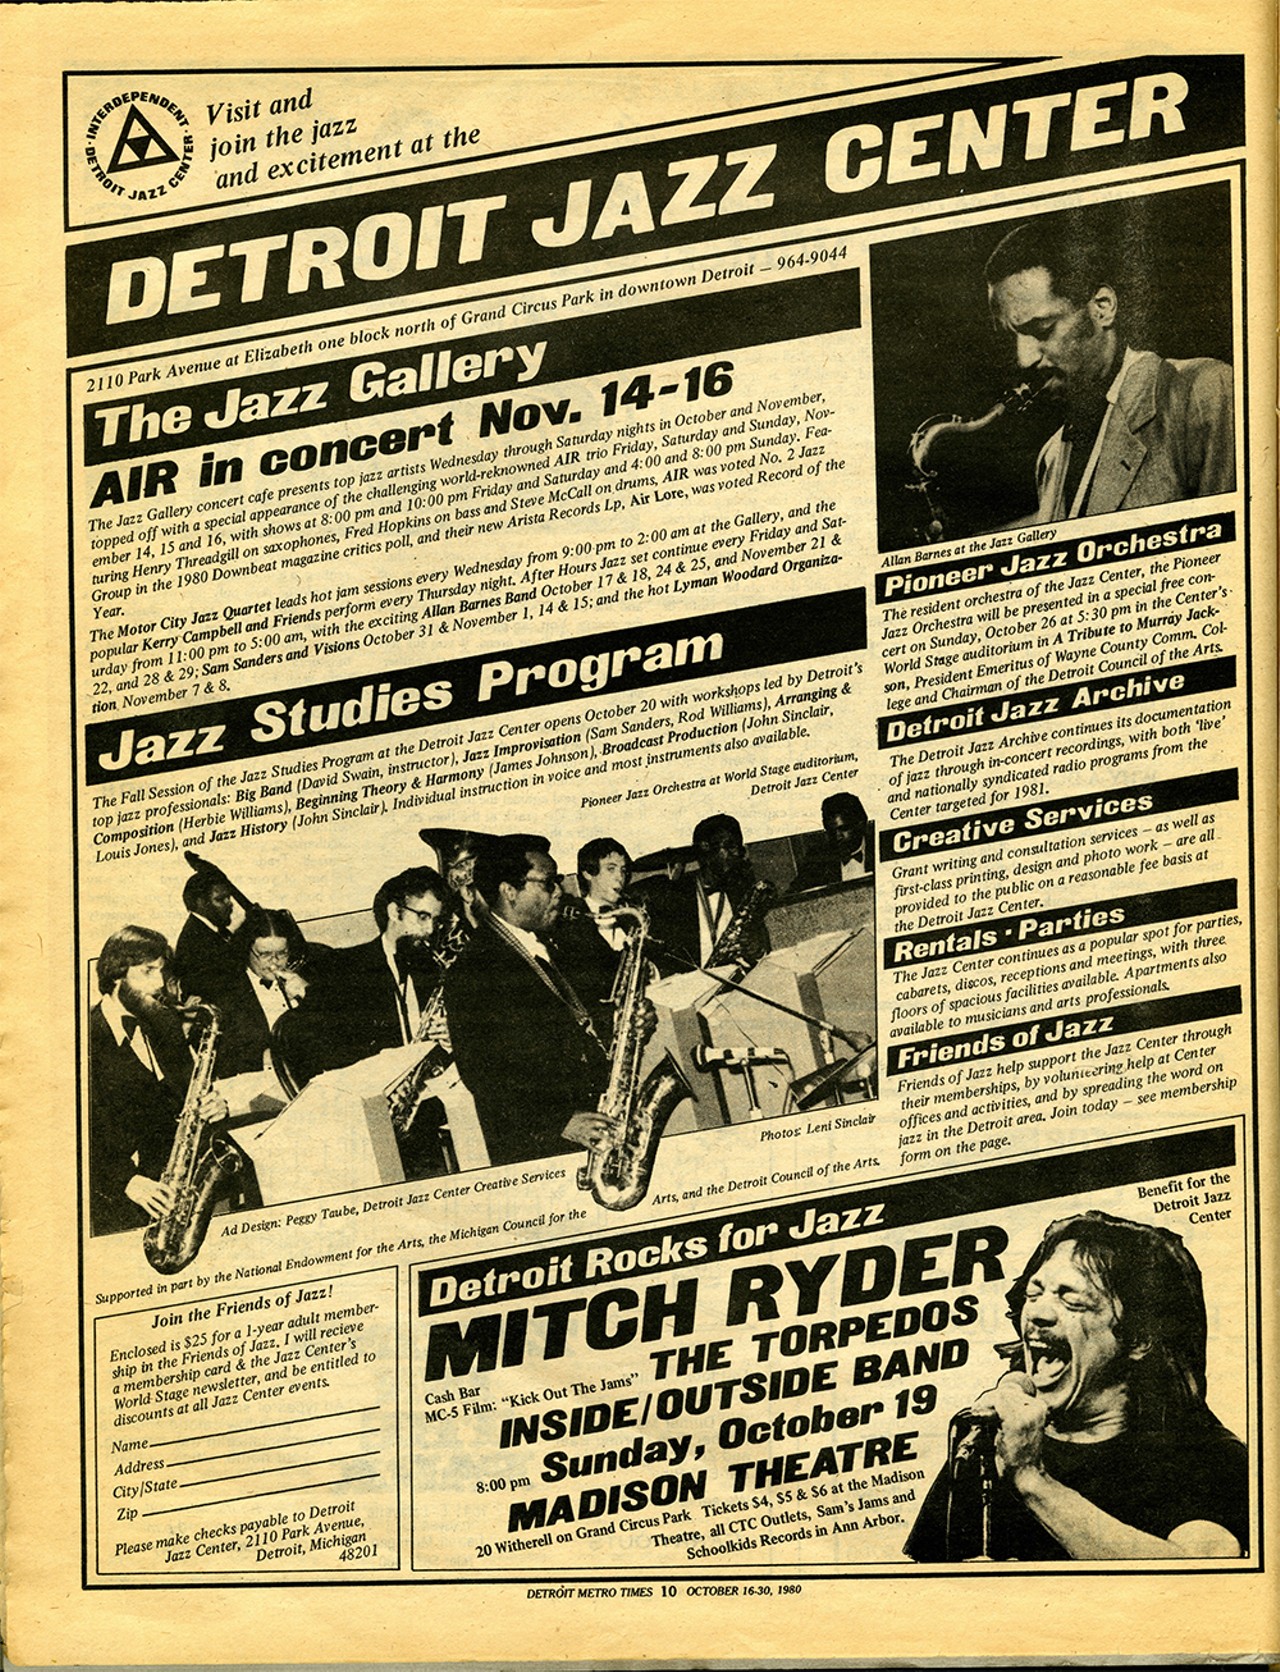 Behold, the first issue of Detroit Metro Times: Oct. 16, 1980